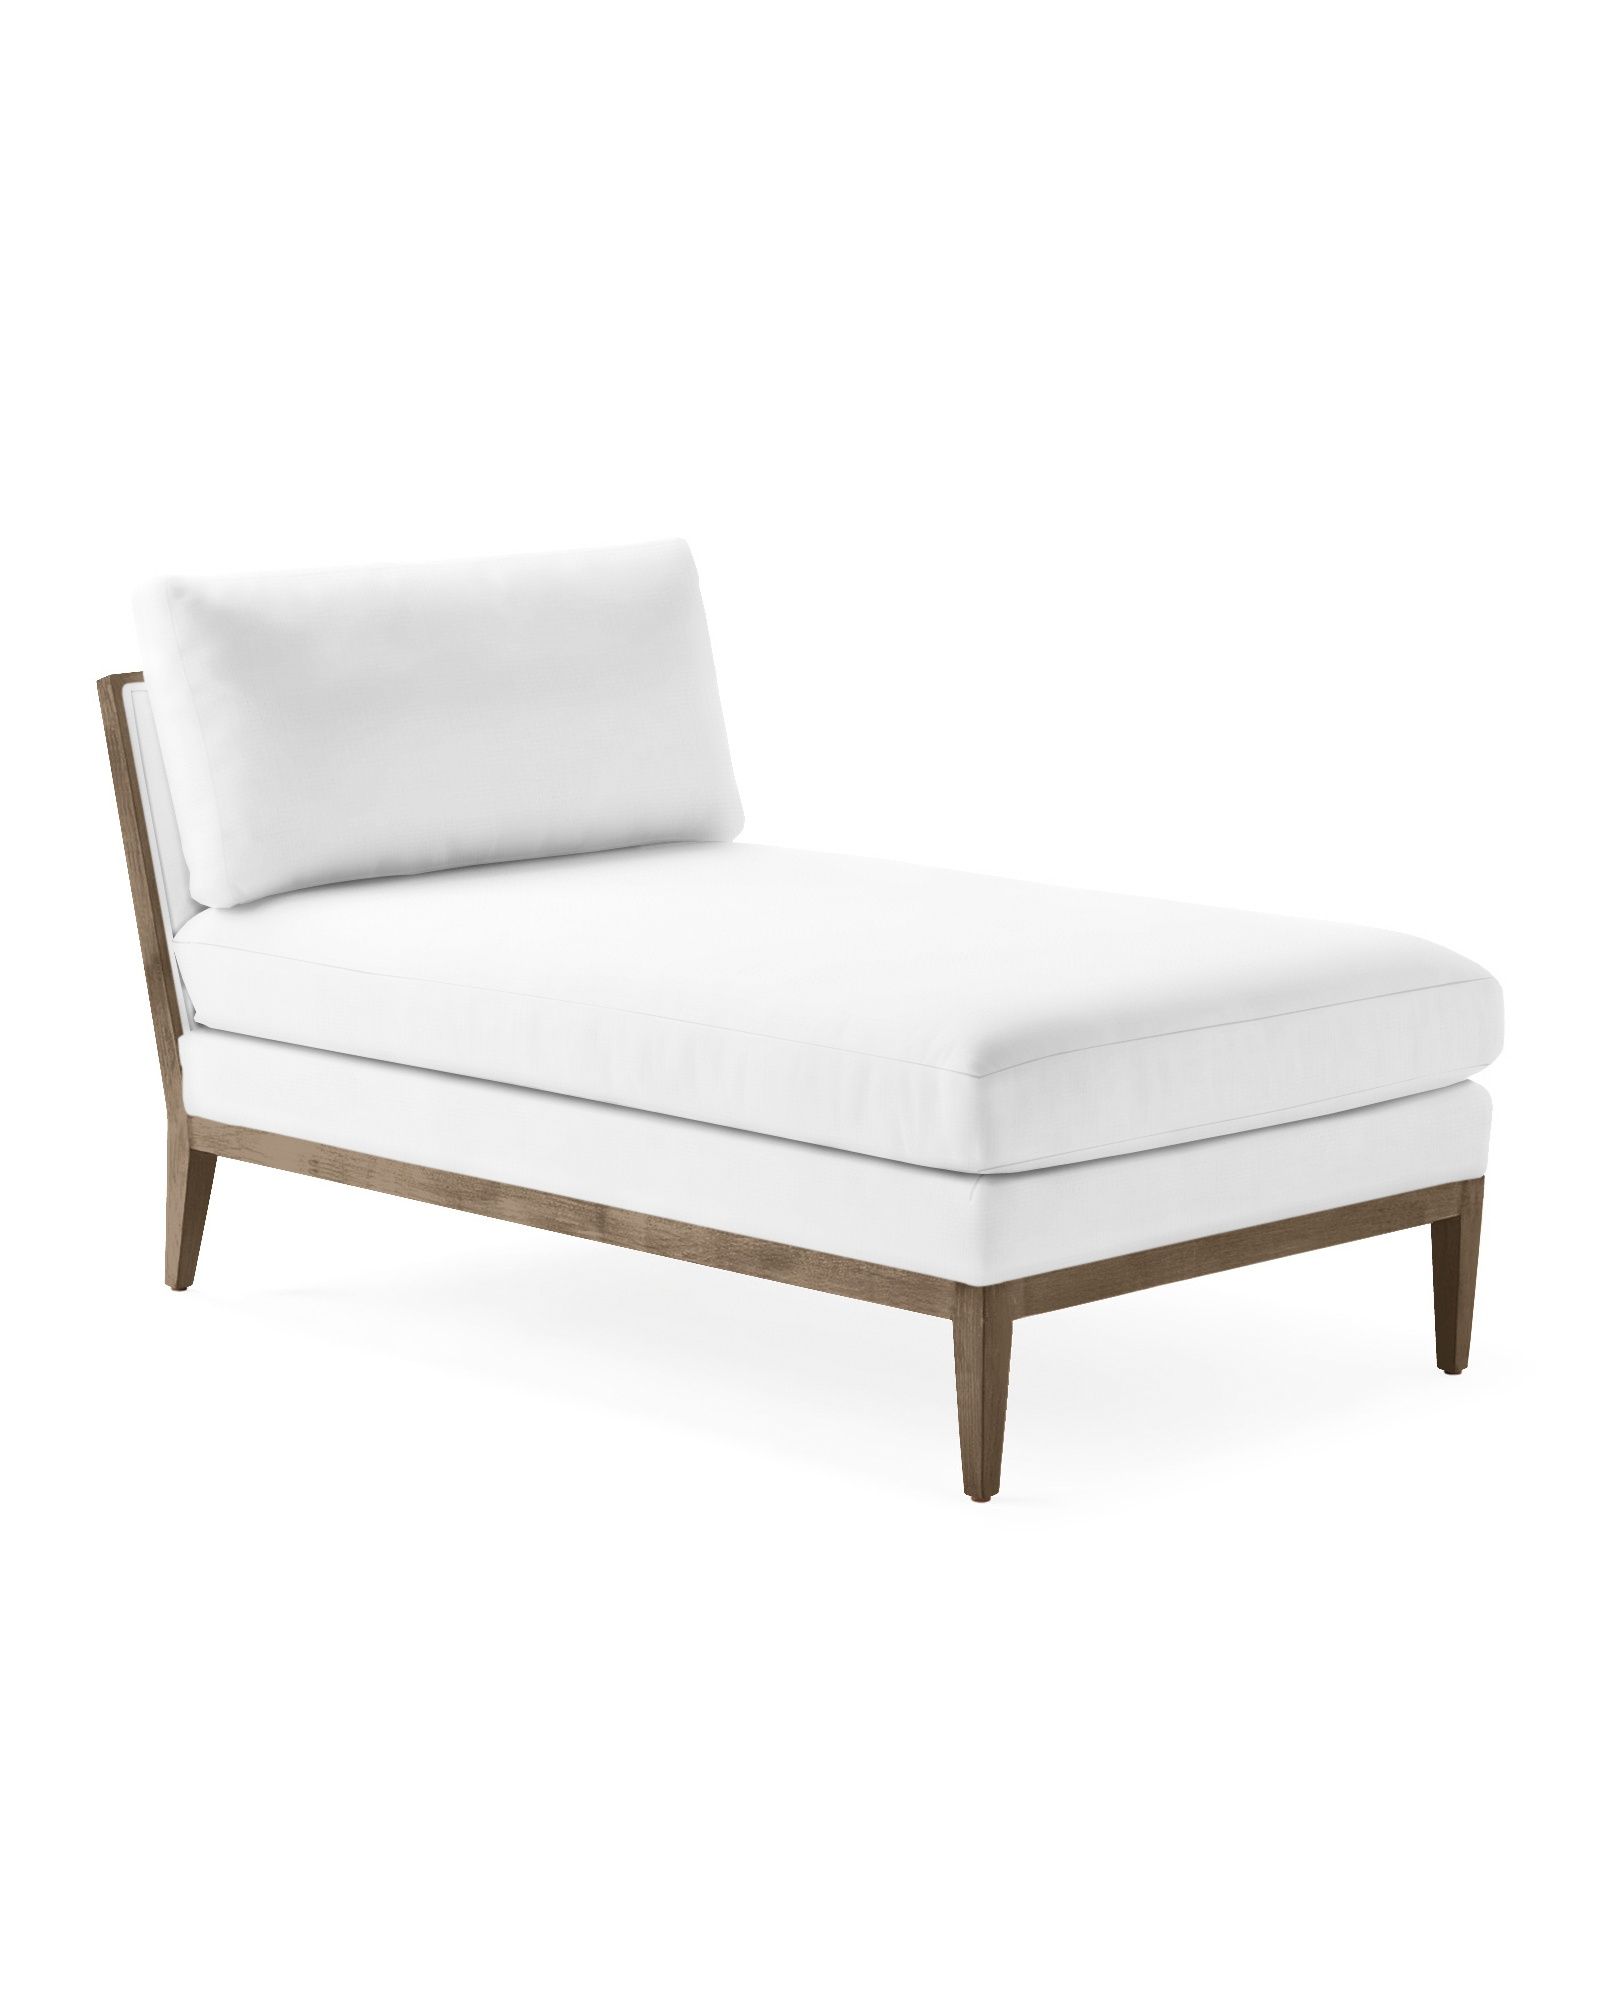 Lakeshore Chaise | Serena and Lily